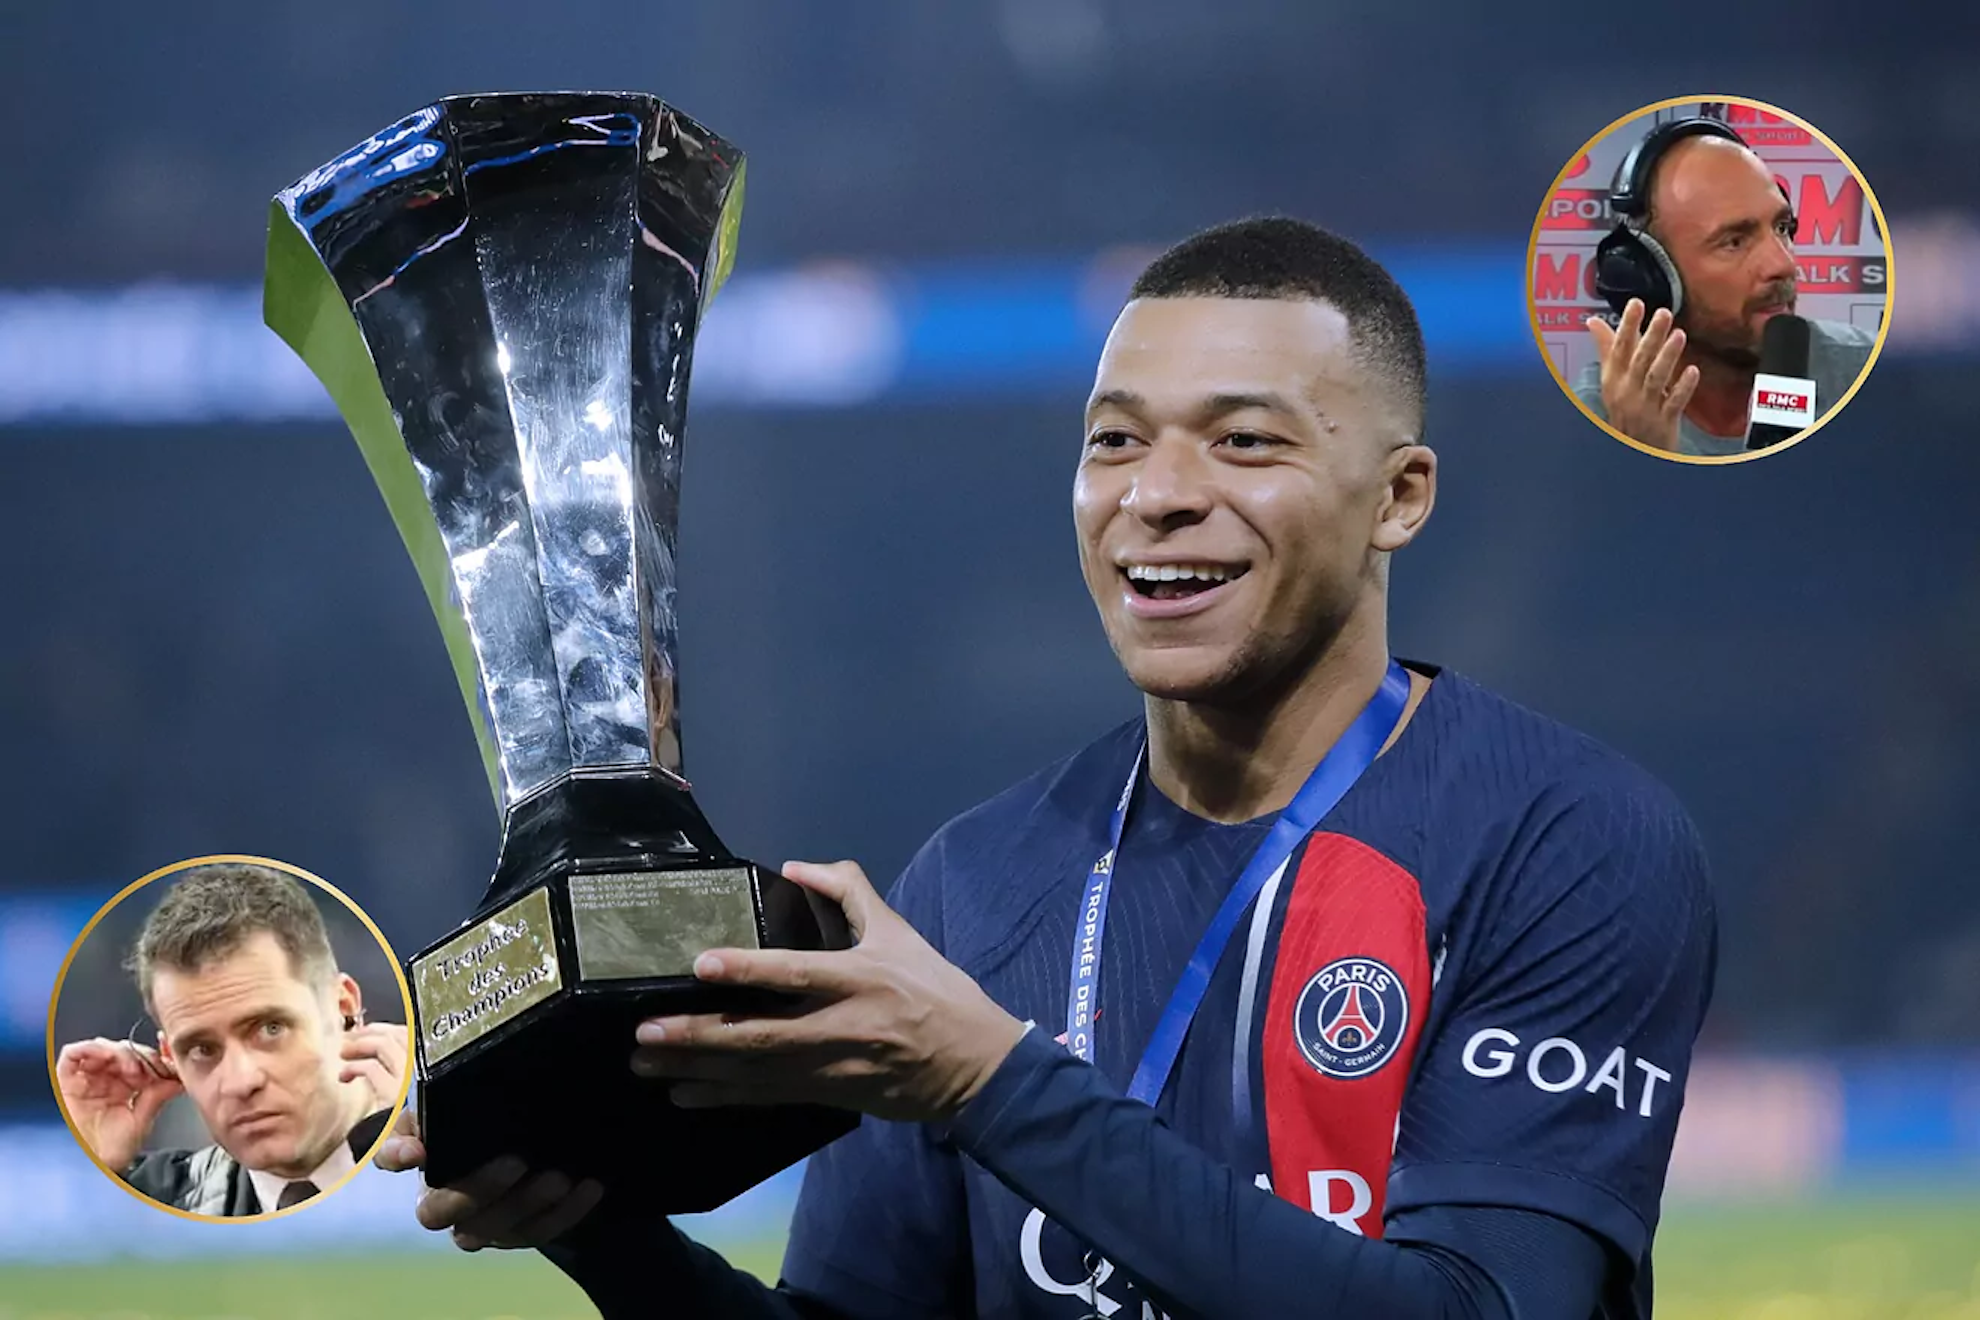 Former France international says Mbappe has already served his time at PSG